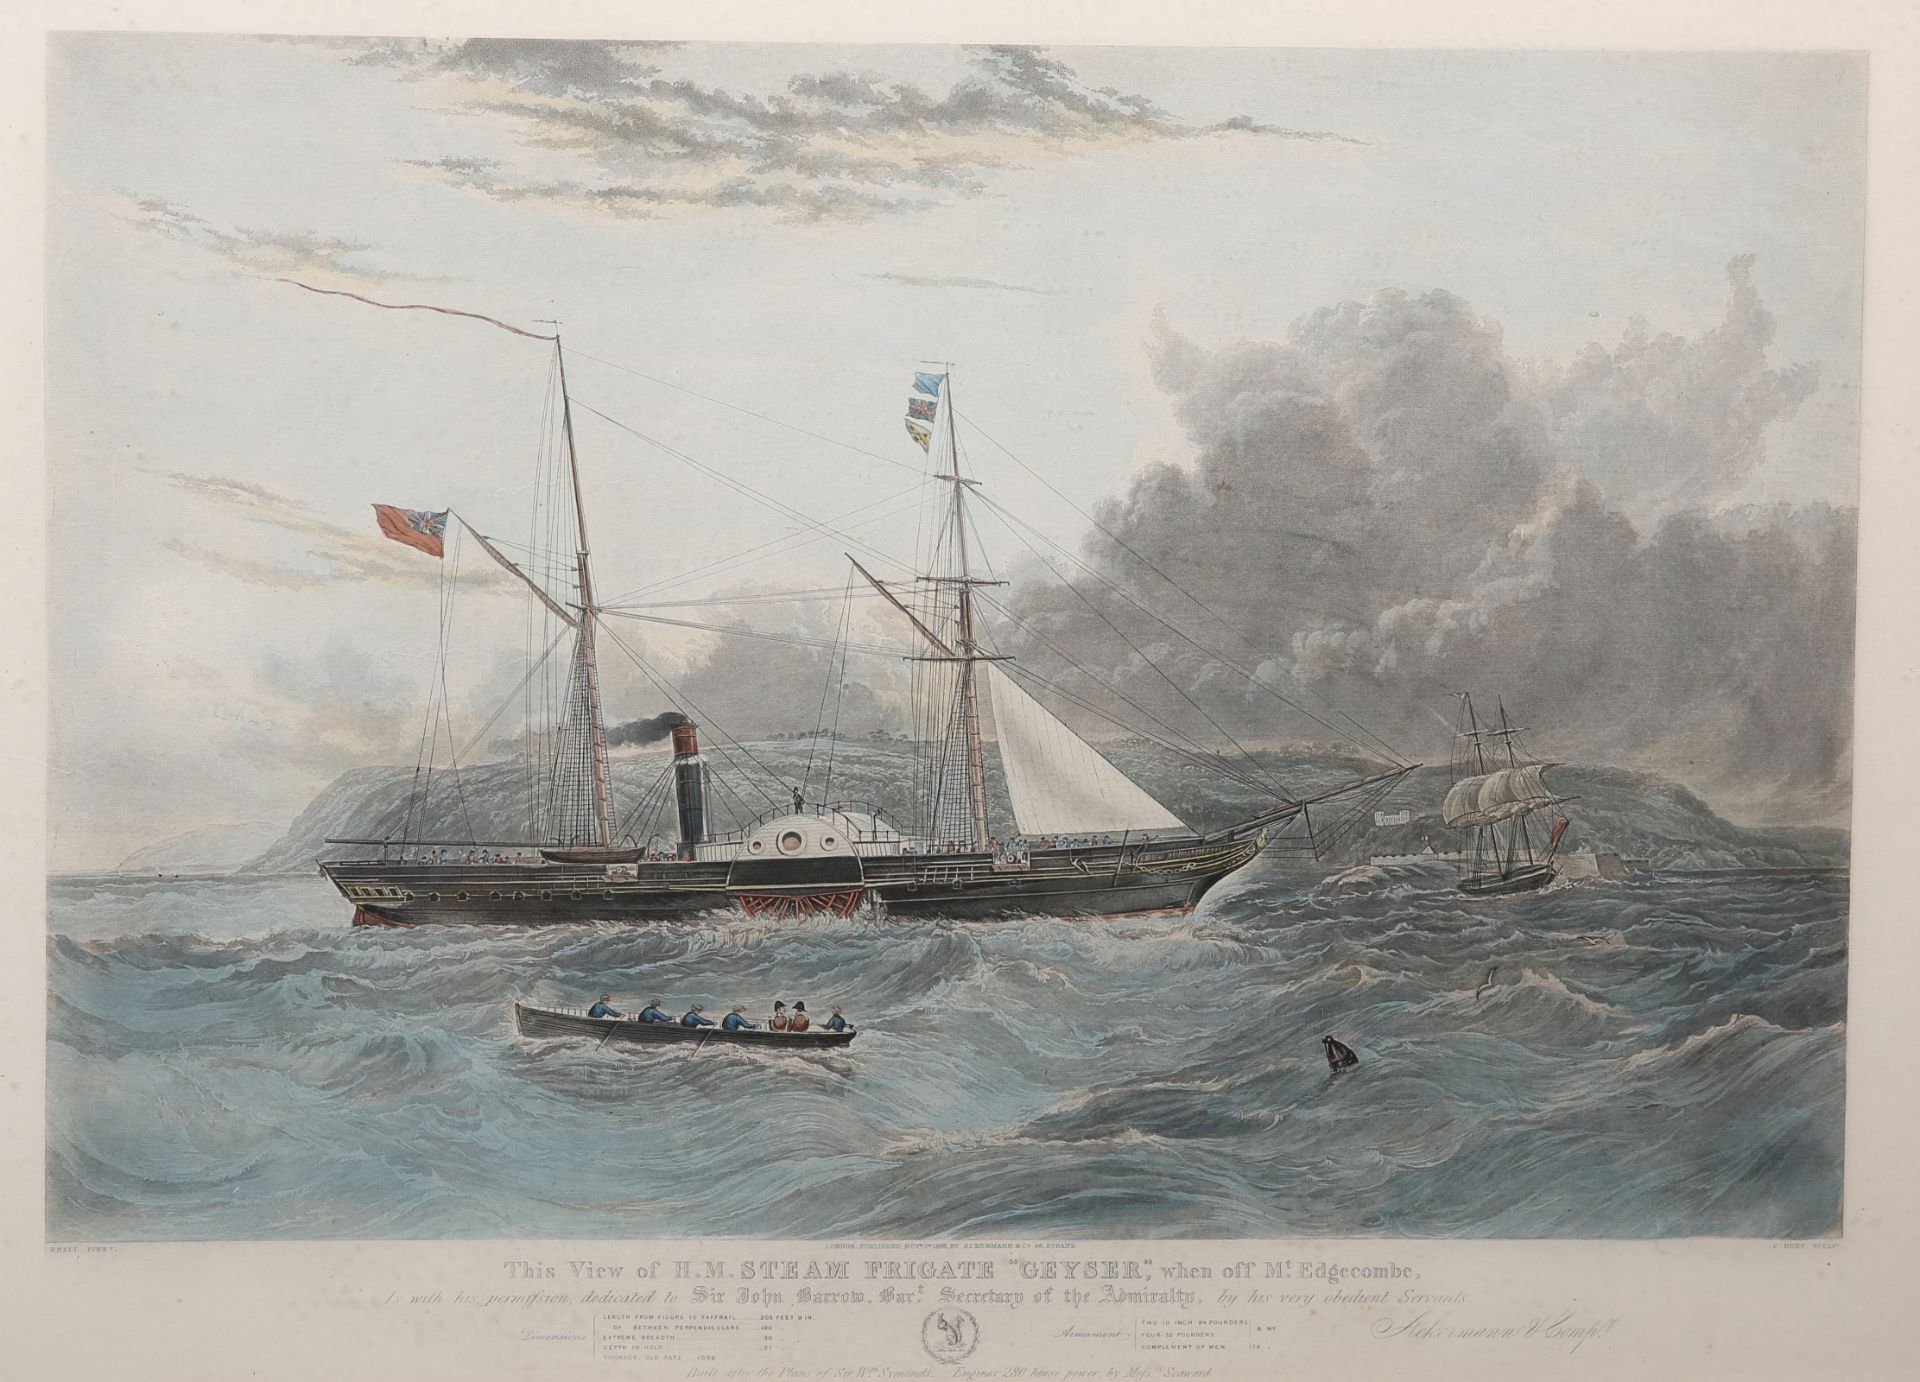 AFTER KNELL, VIEW OF H.M.S. STEAM FRIGATE 'GEYSER'